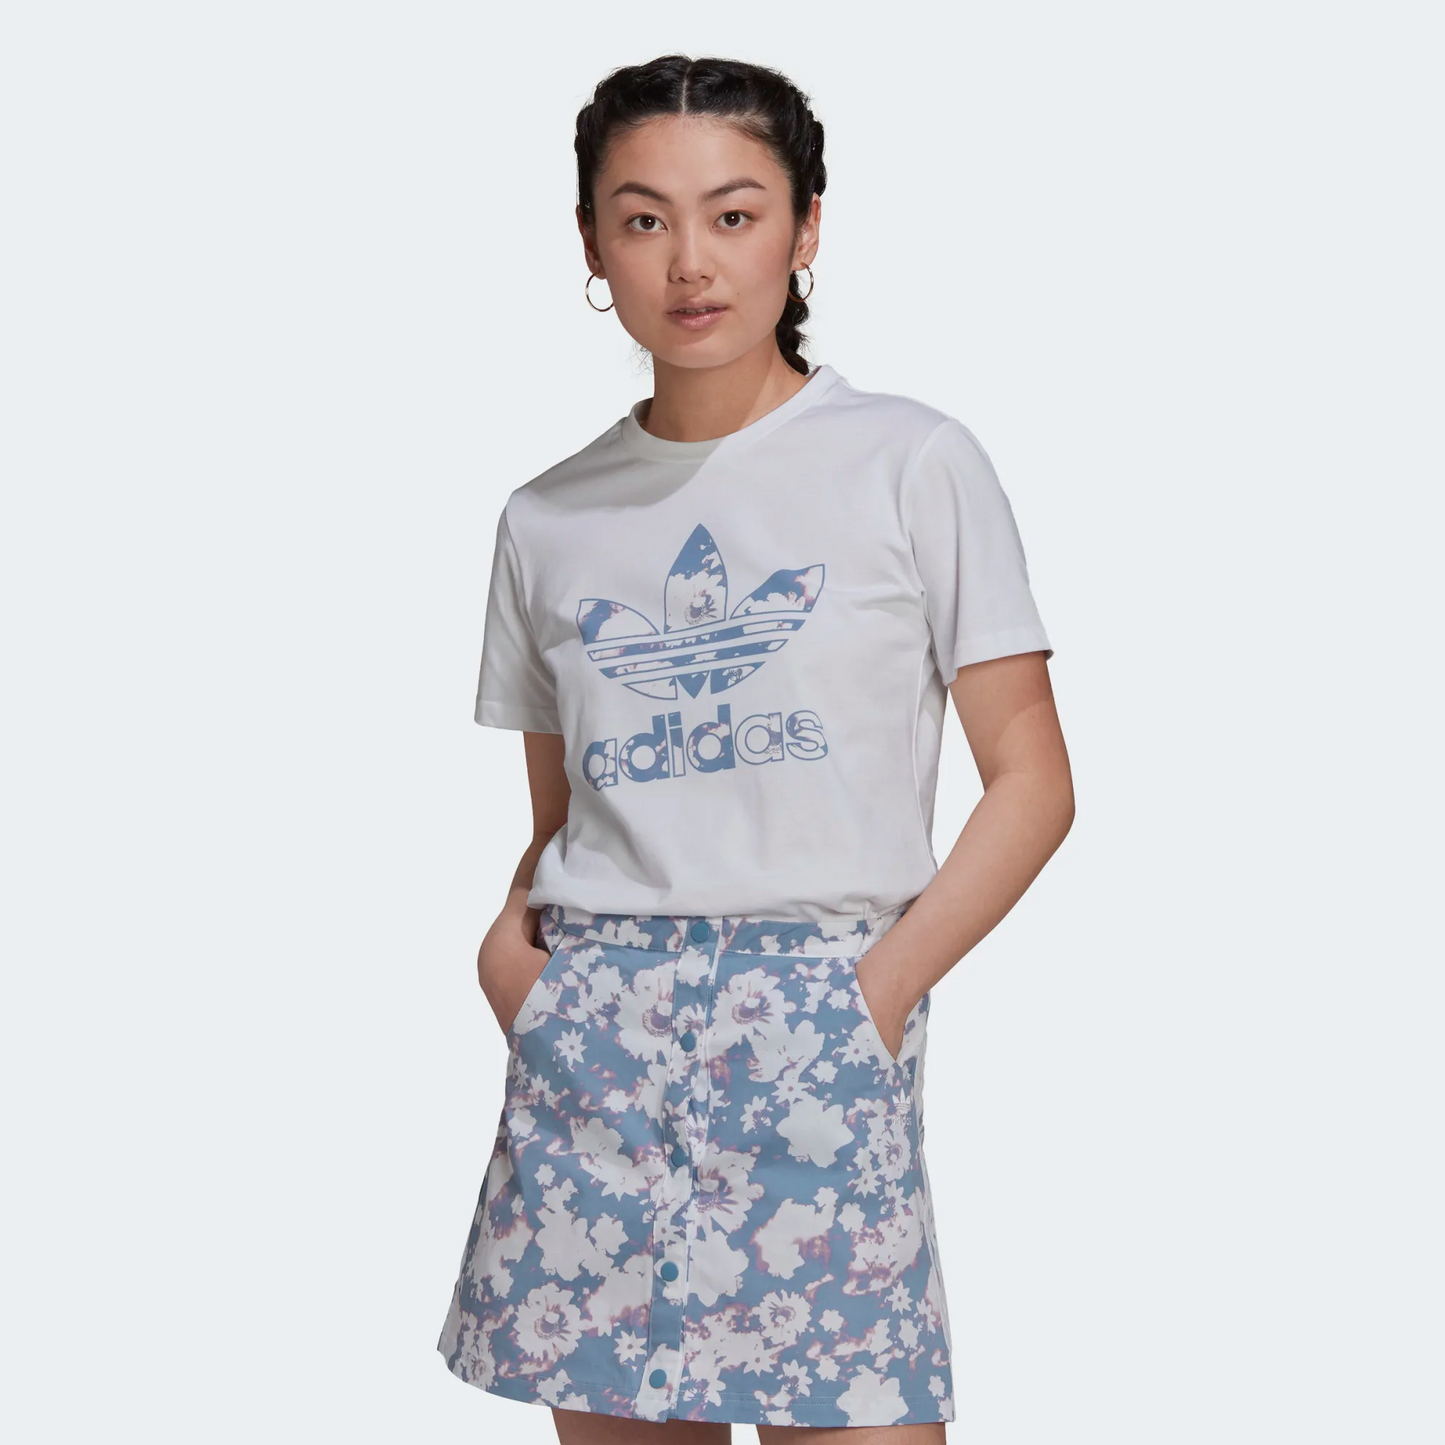 Adidas Women's Tee - White / Ambient Sky Sportive